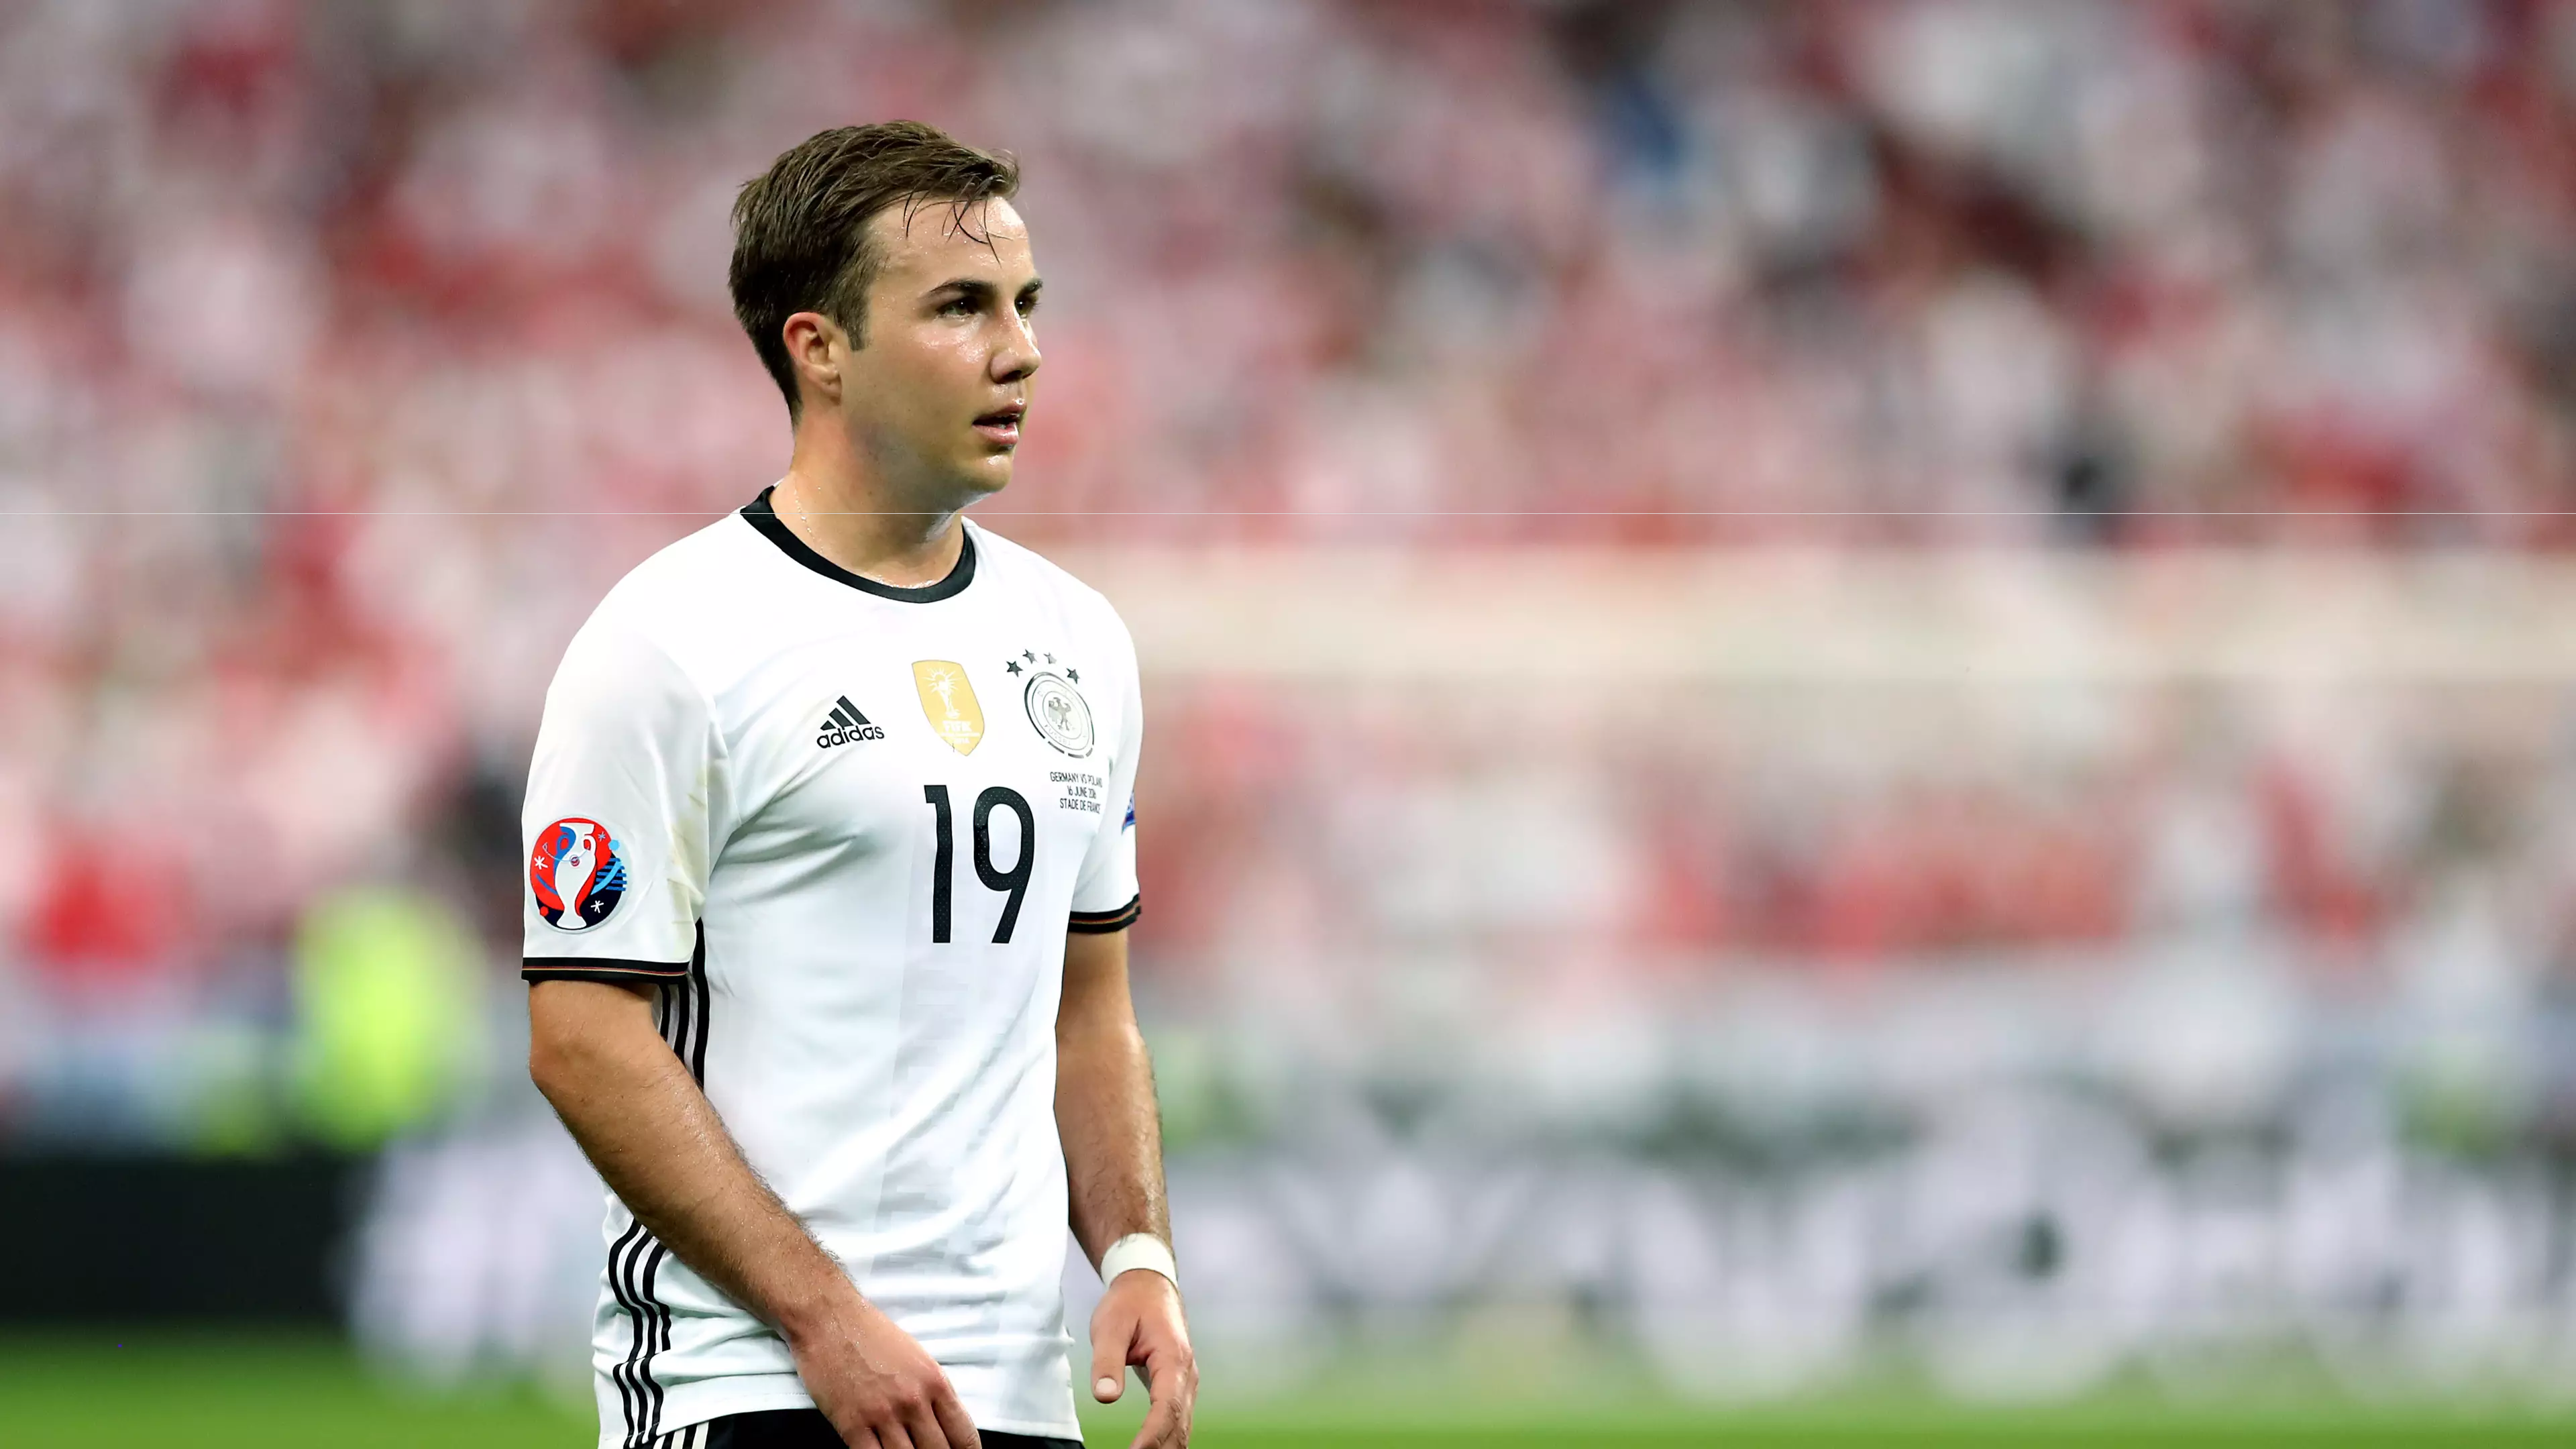 Club Willing To Save Mario Gotze But Only If Deal Is Right